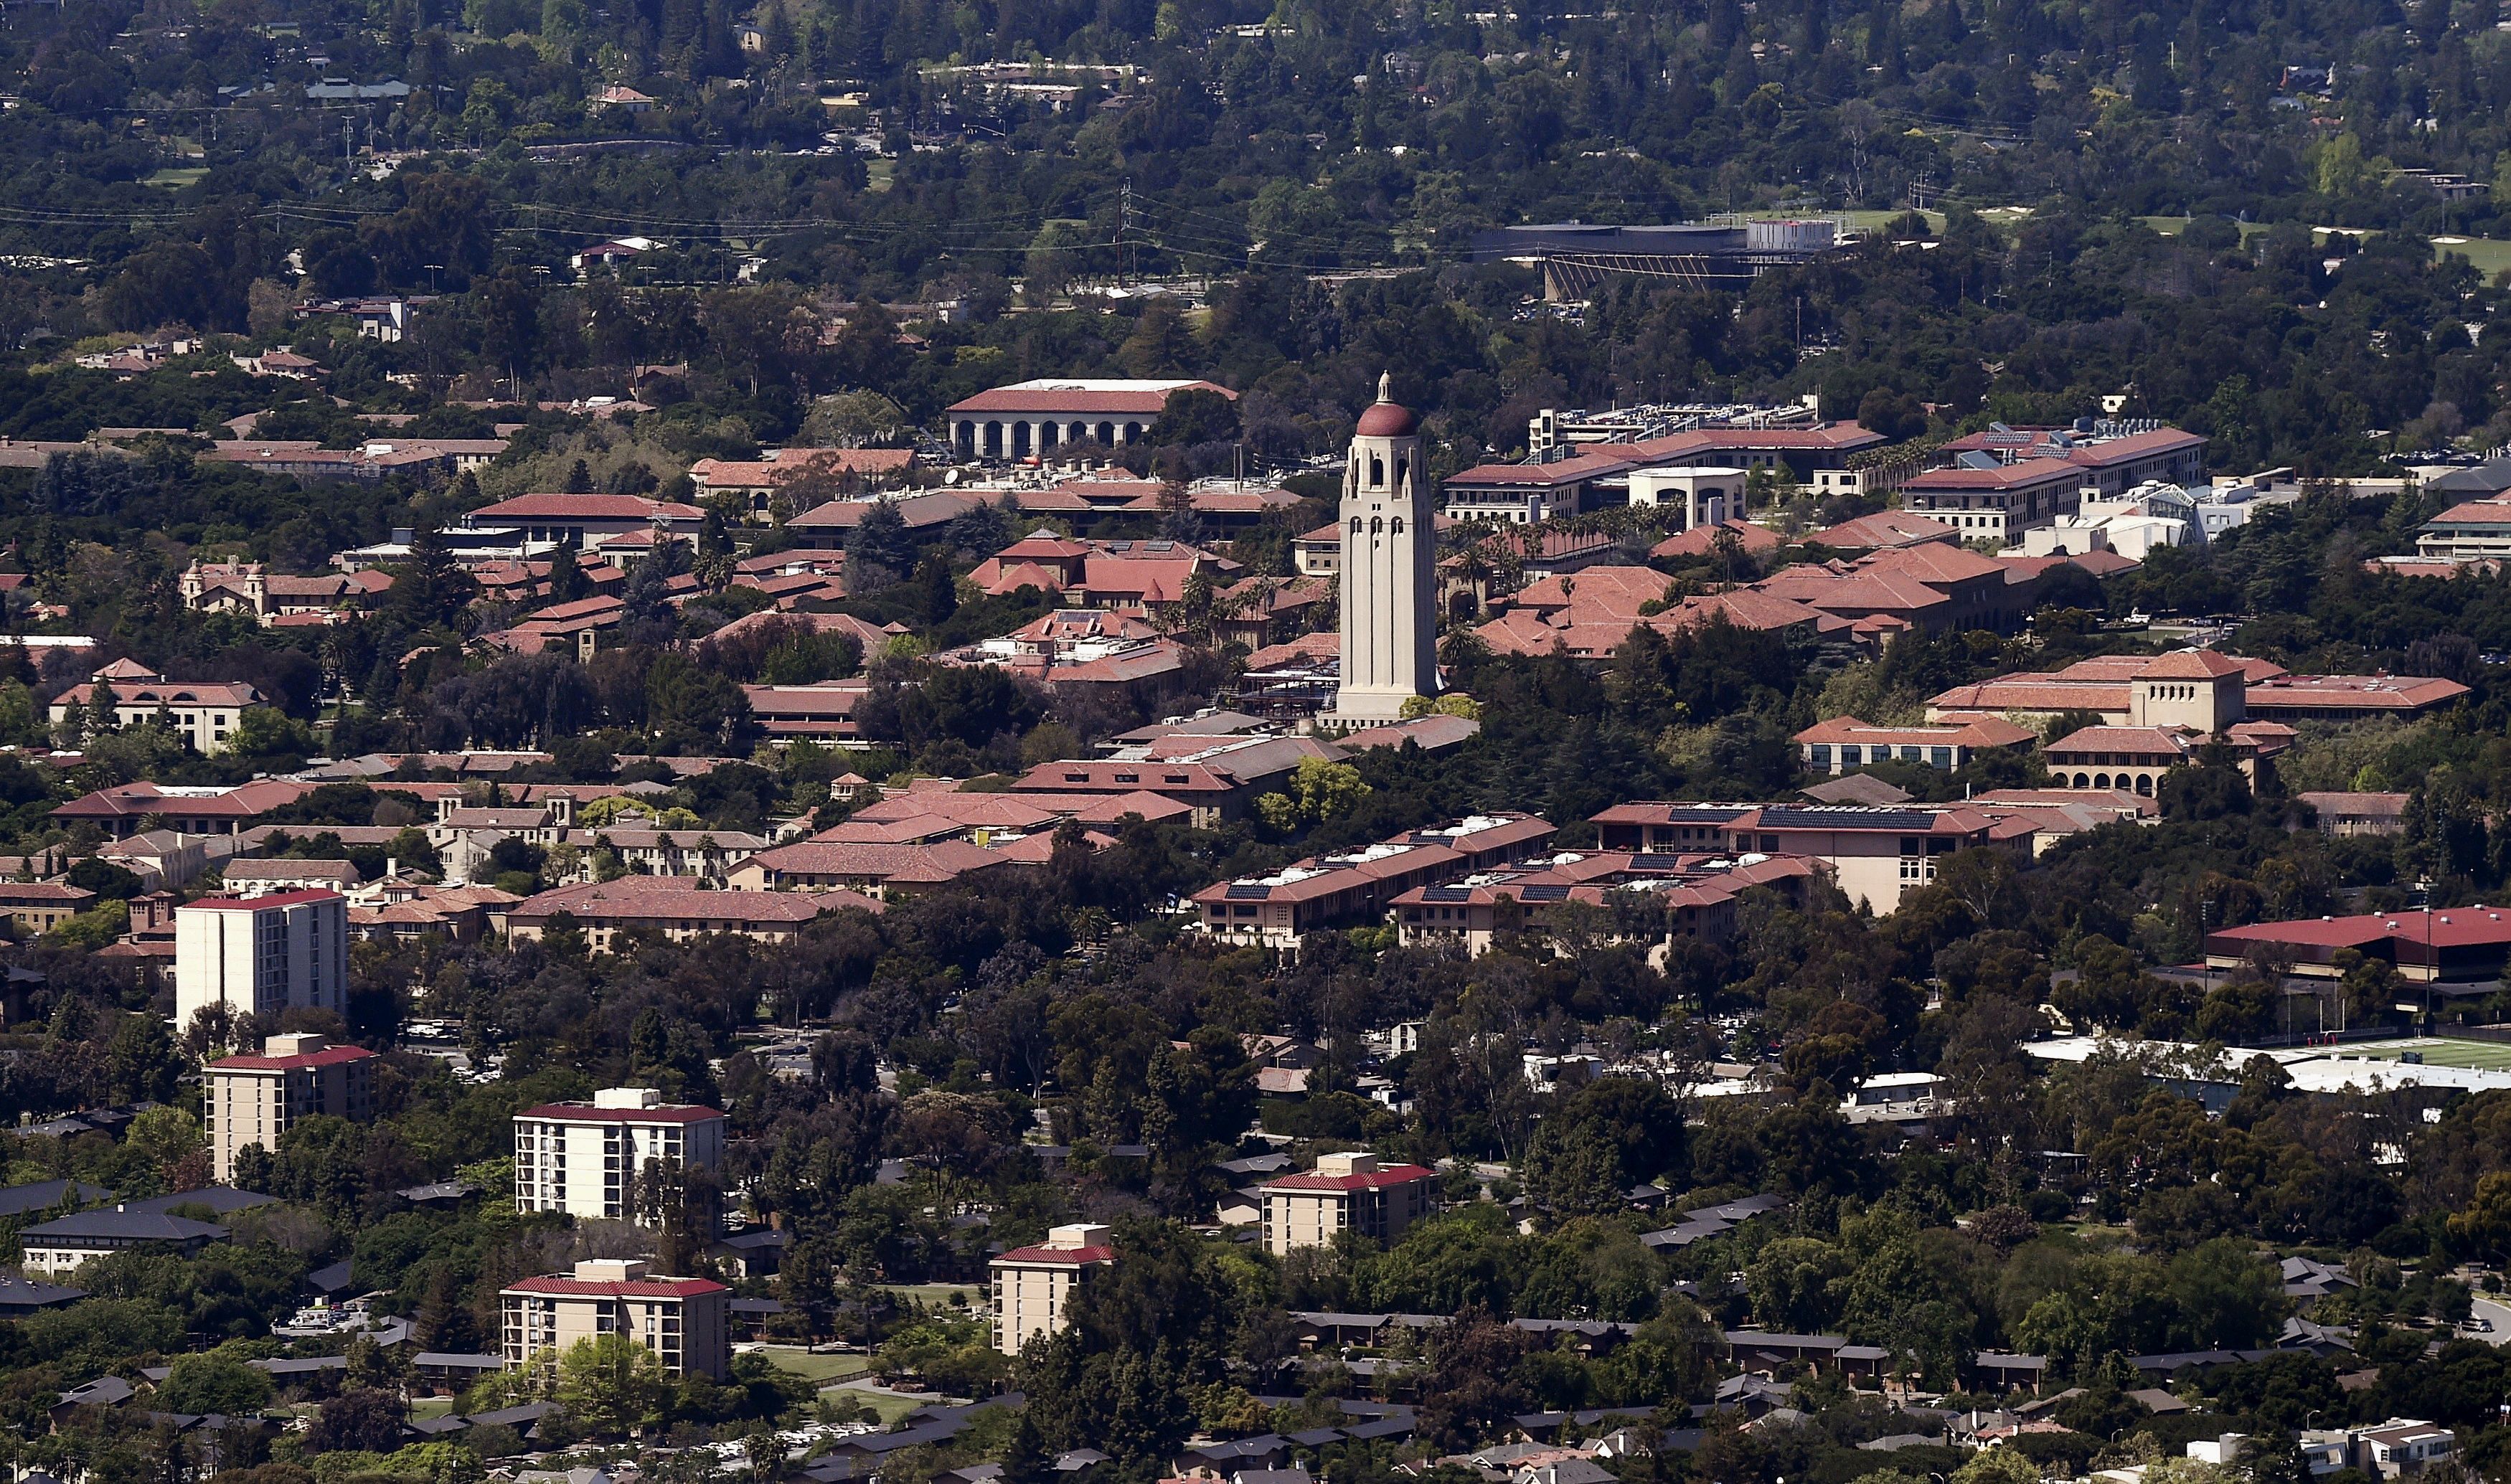 Stanford University's campus is seen in an aerial photo in Stanford